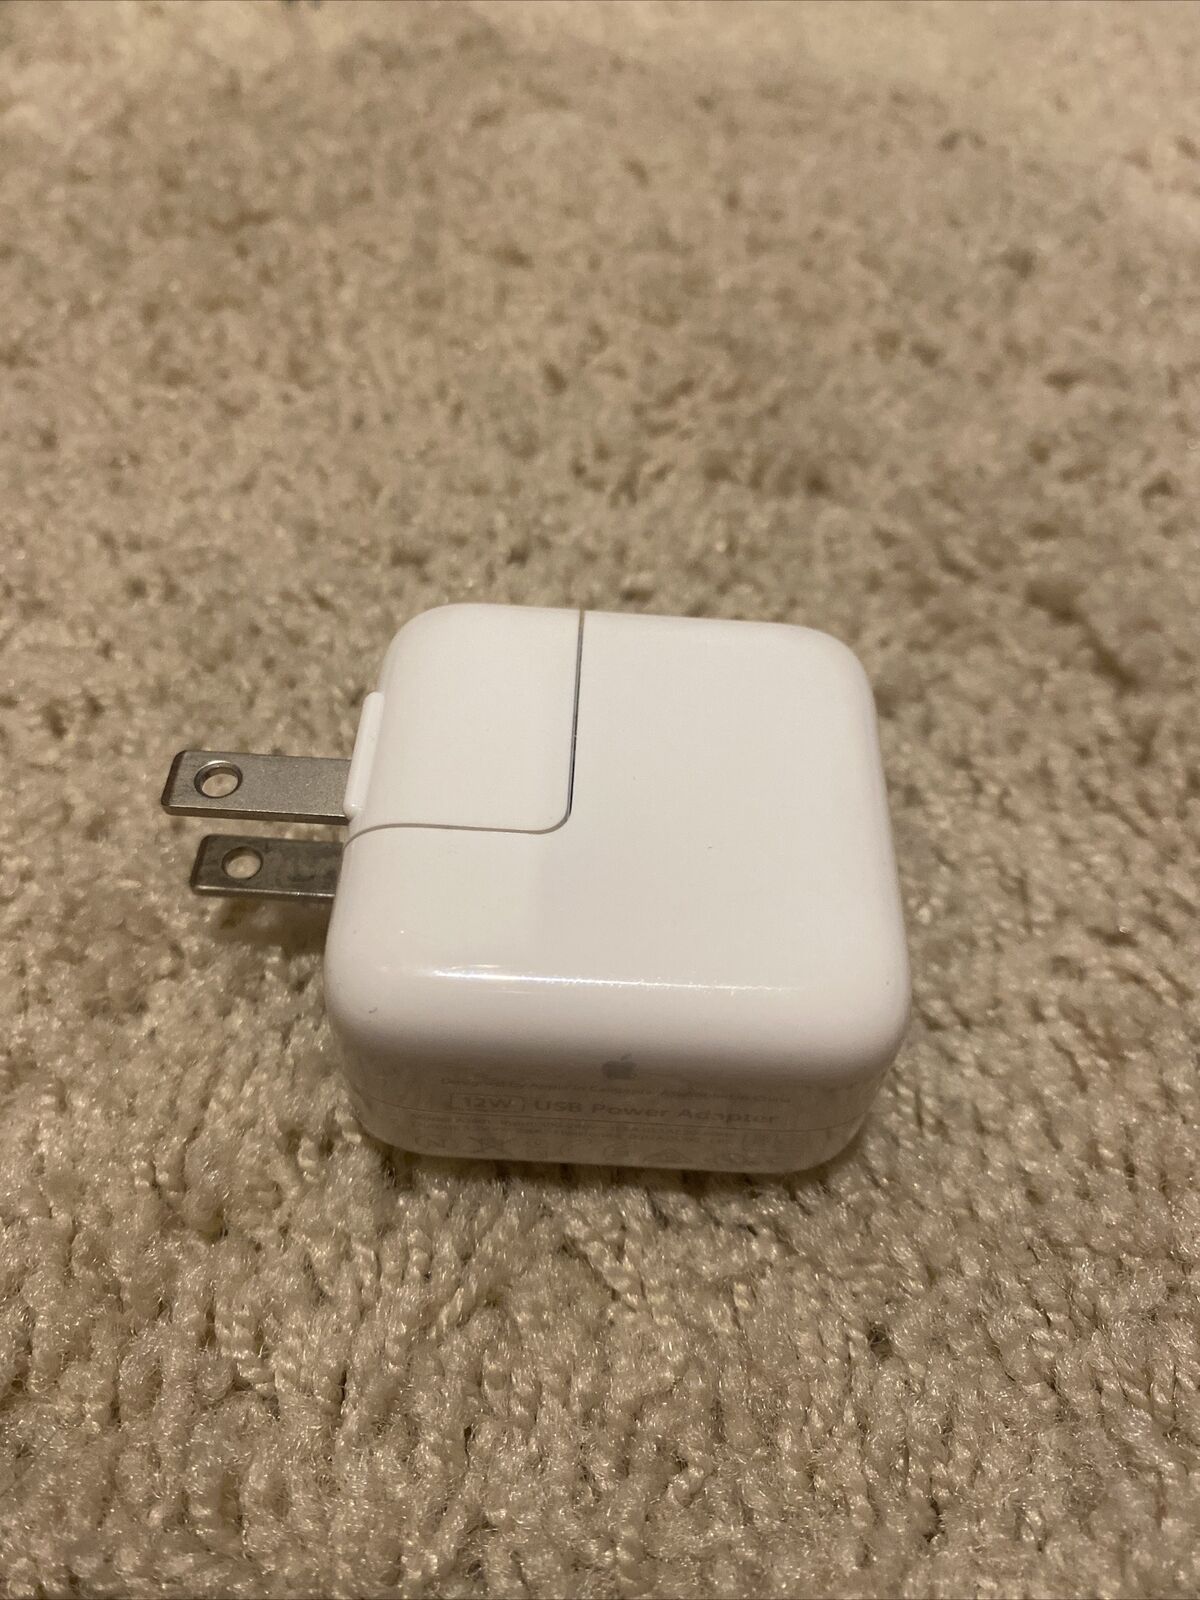 Genuine Apple 12W USB Power Adapter Charger Charging Block Gently Used￼